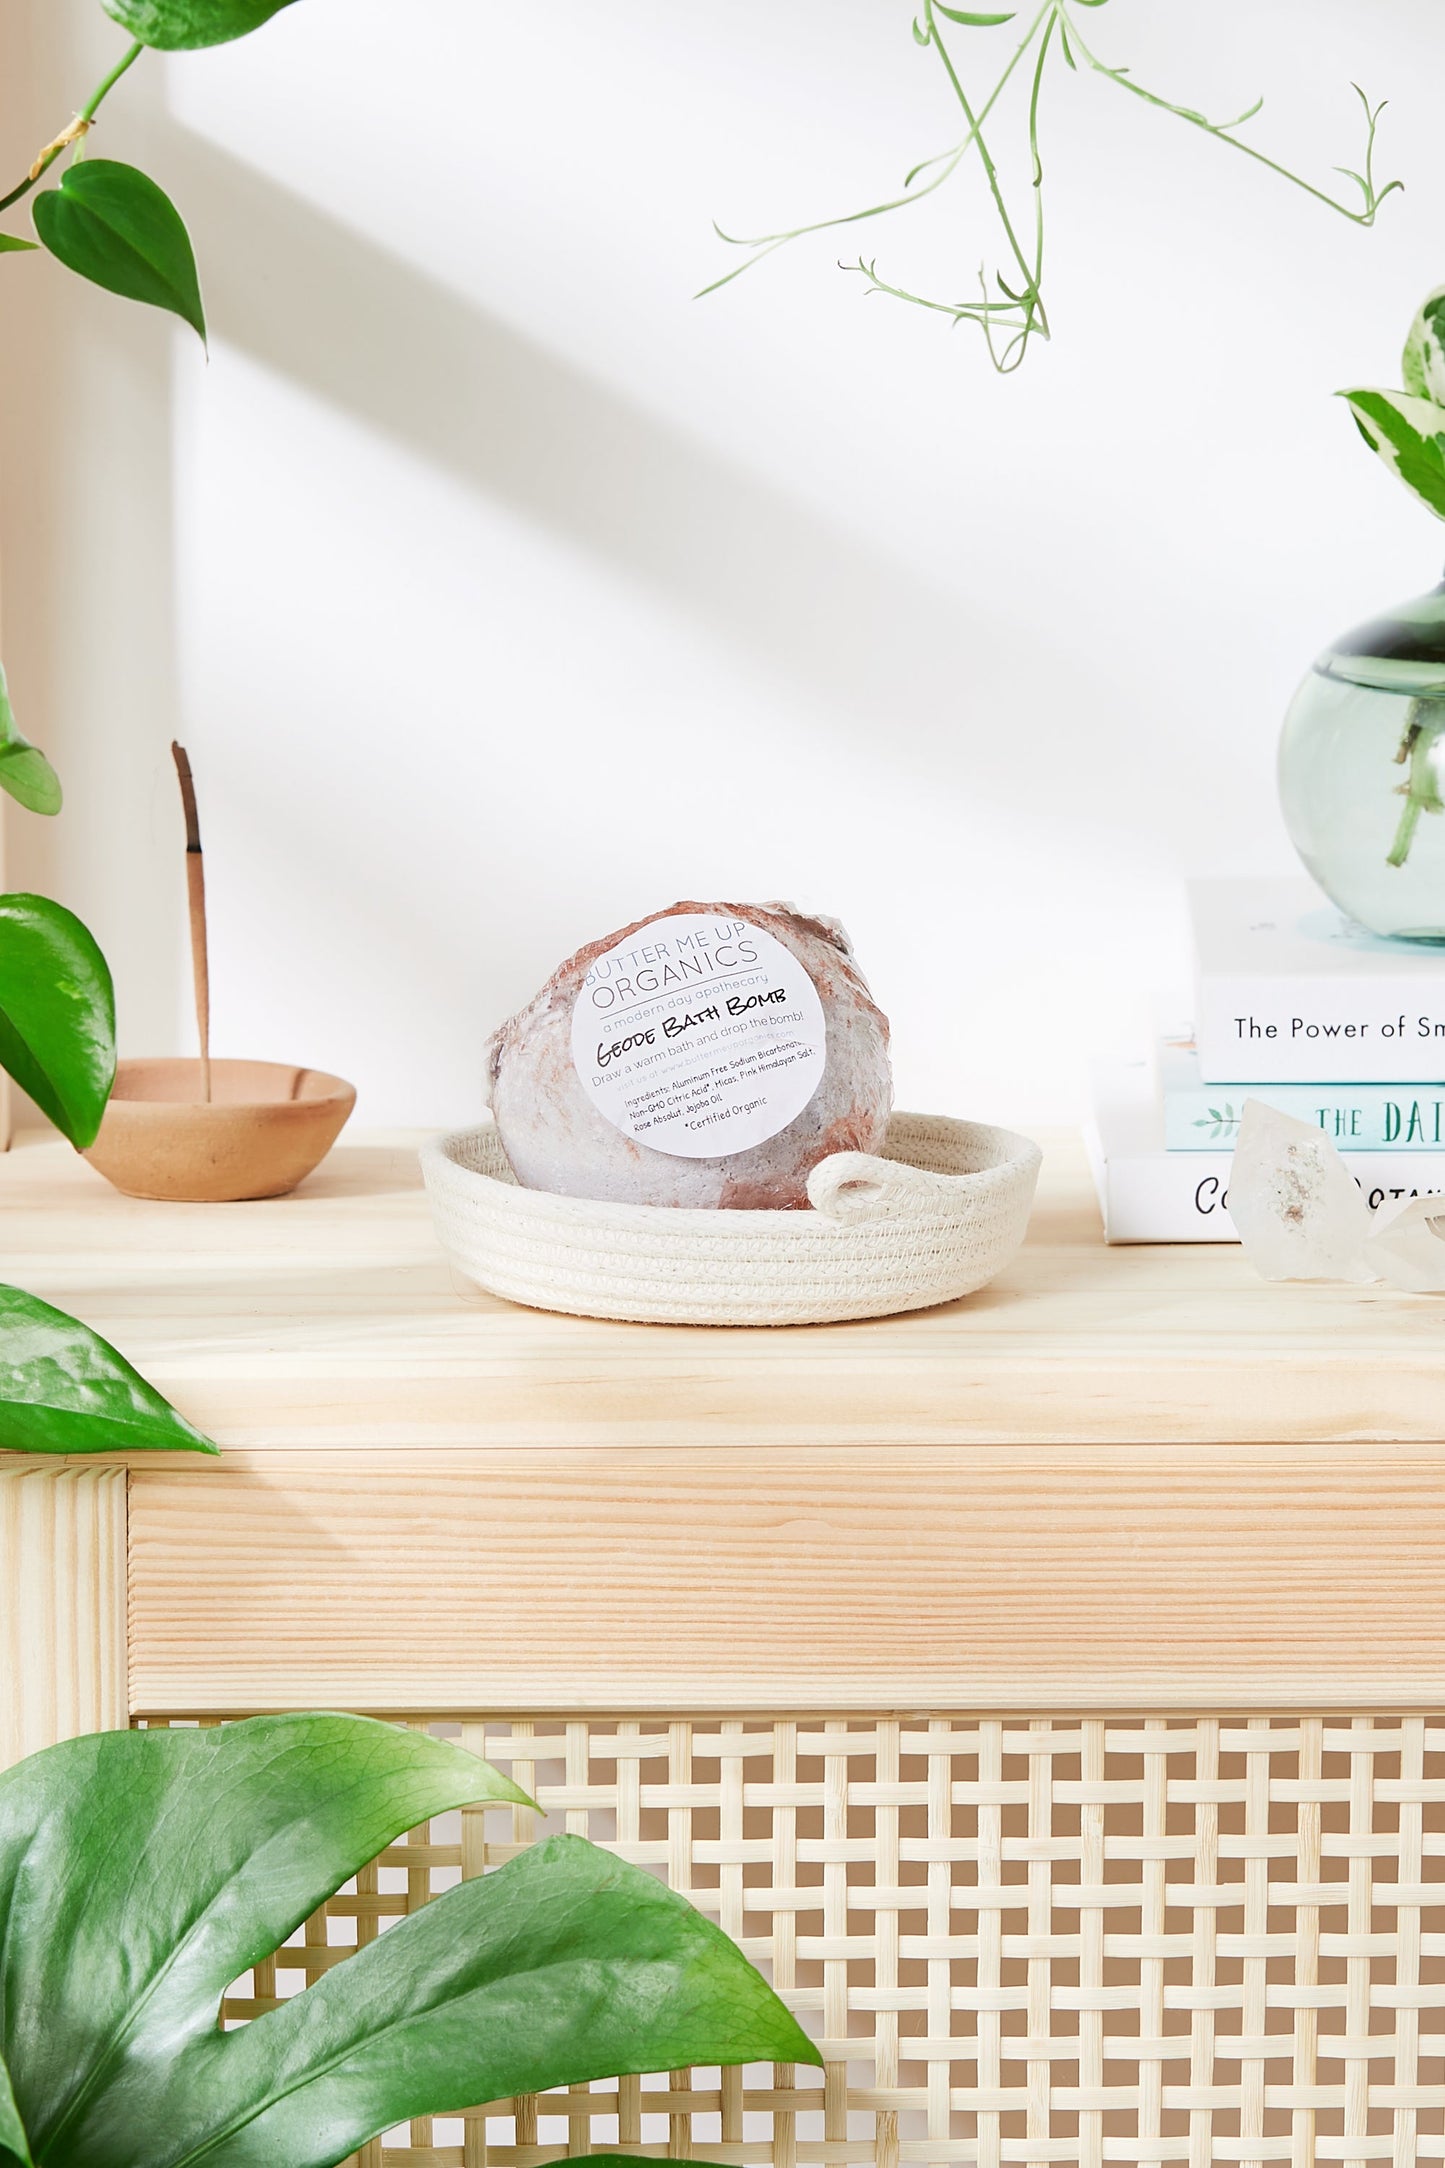 A round soap labeled "Energy Cleansing Soap" rests in a white dish on a wooden surface, surrounded by green plants, a few stacked books, and a White Smokey Organic Geode Bath Bombs.